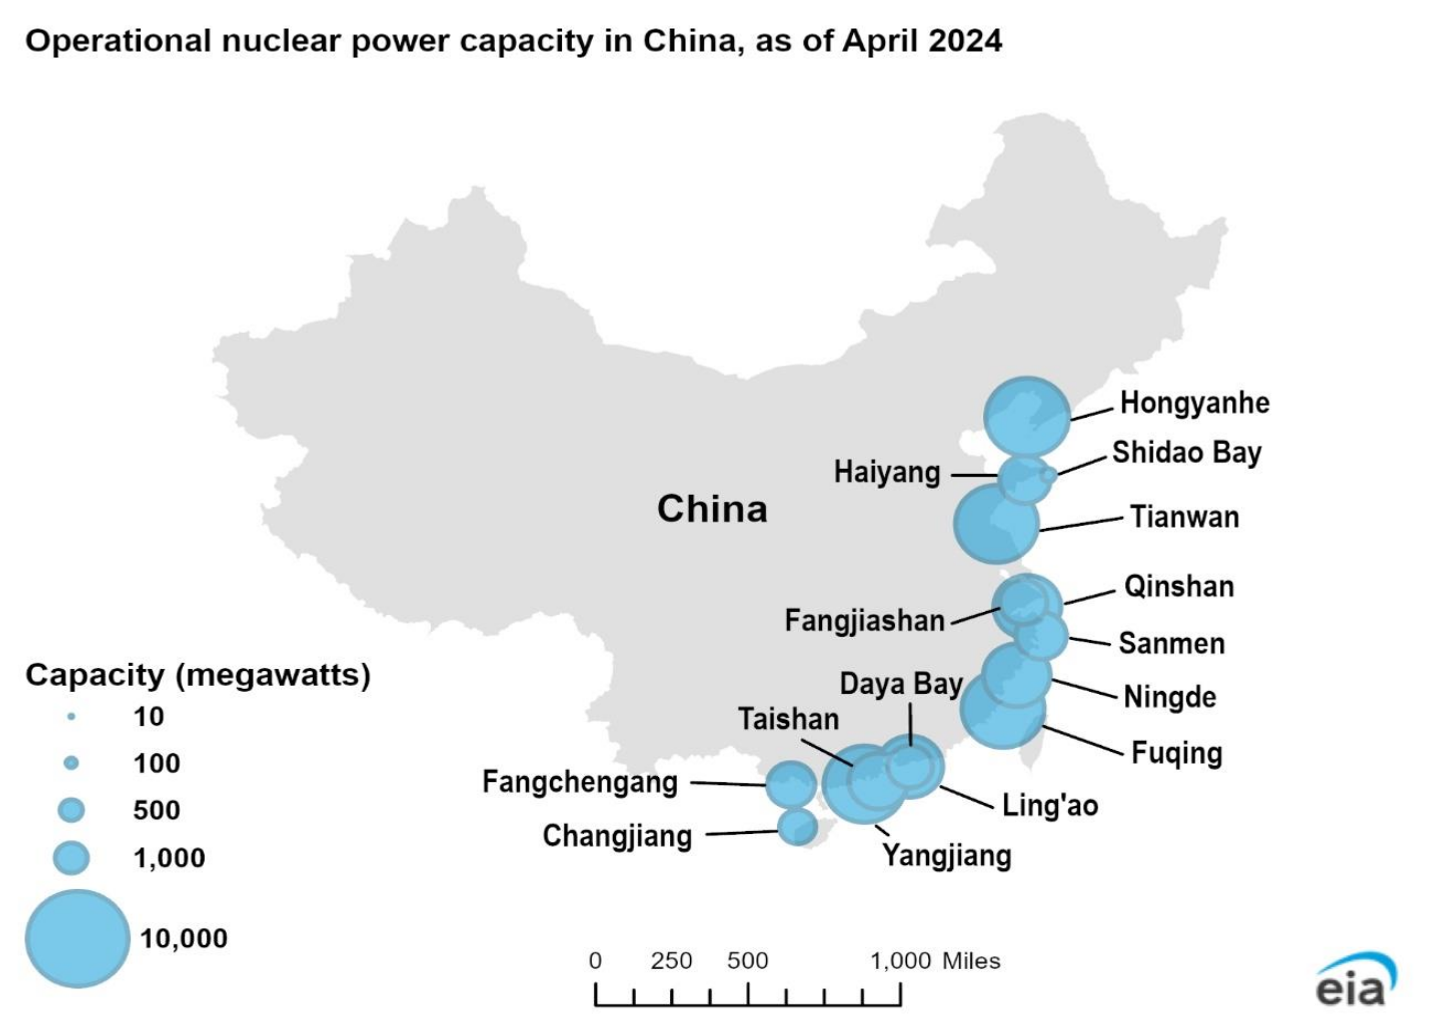 operational nuclear power capacity in China as of April 2024